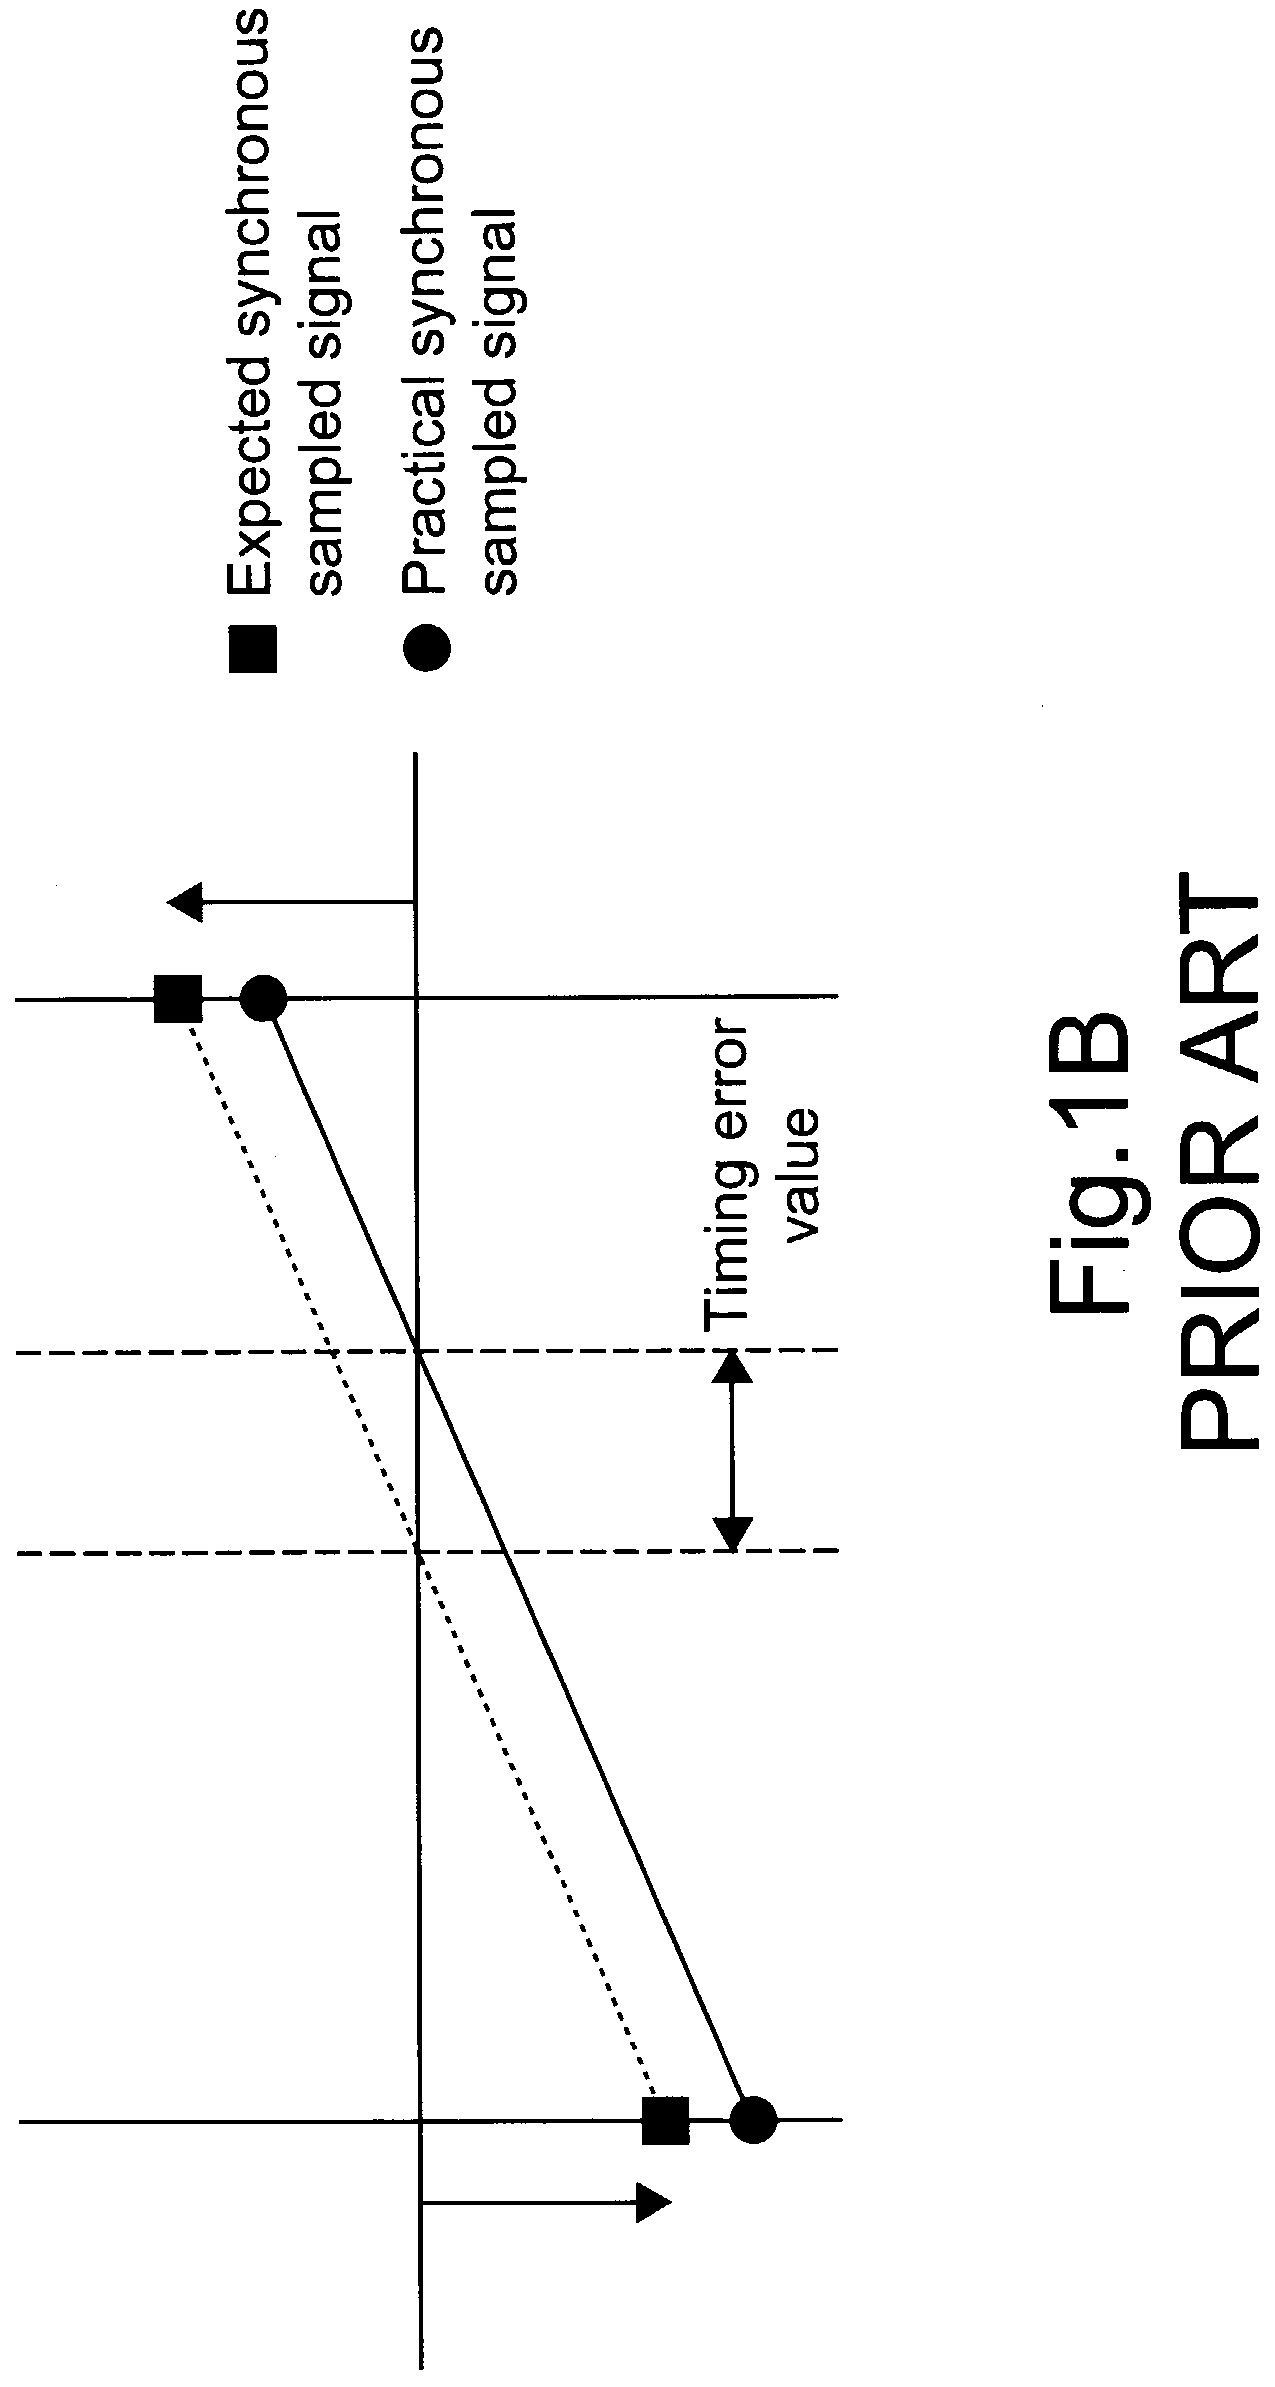 Digital phase-locked loop device for synchronizing signal and method for generating stable synchronous signal